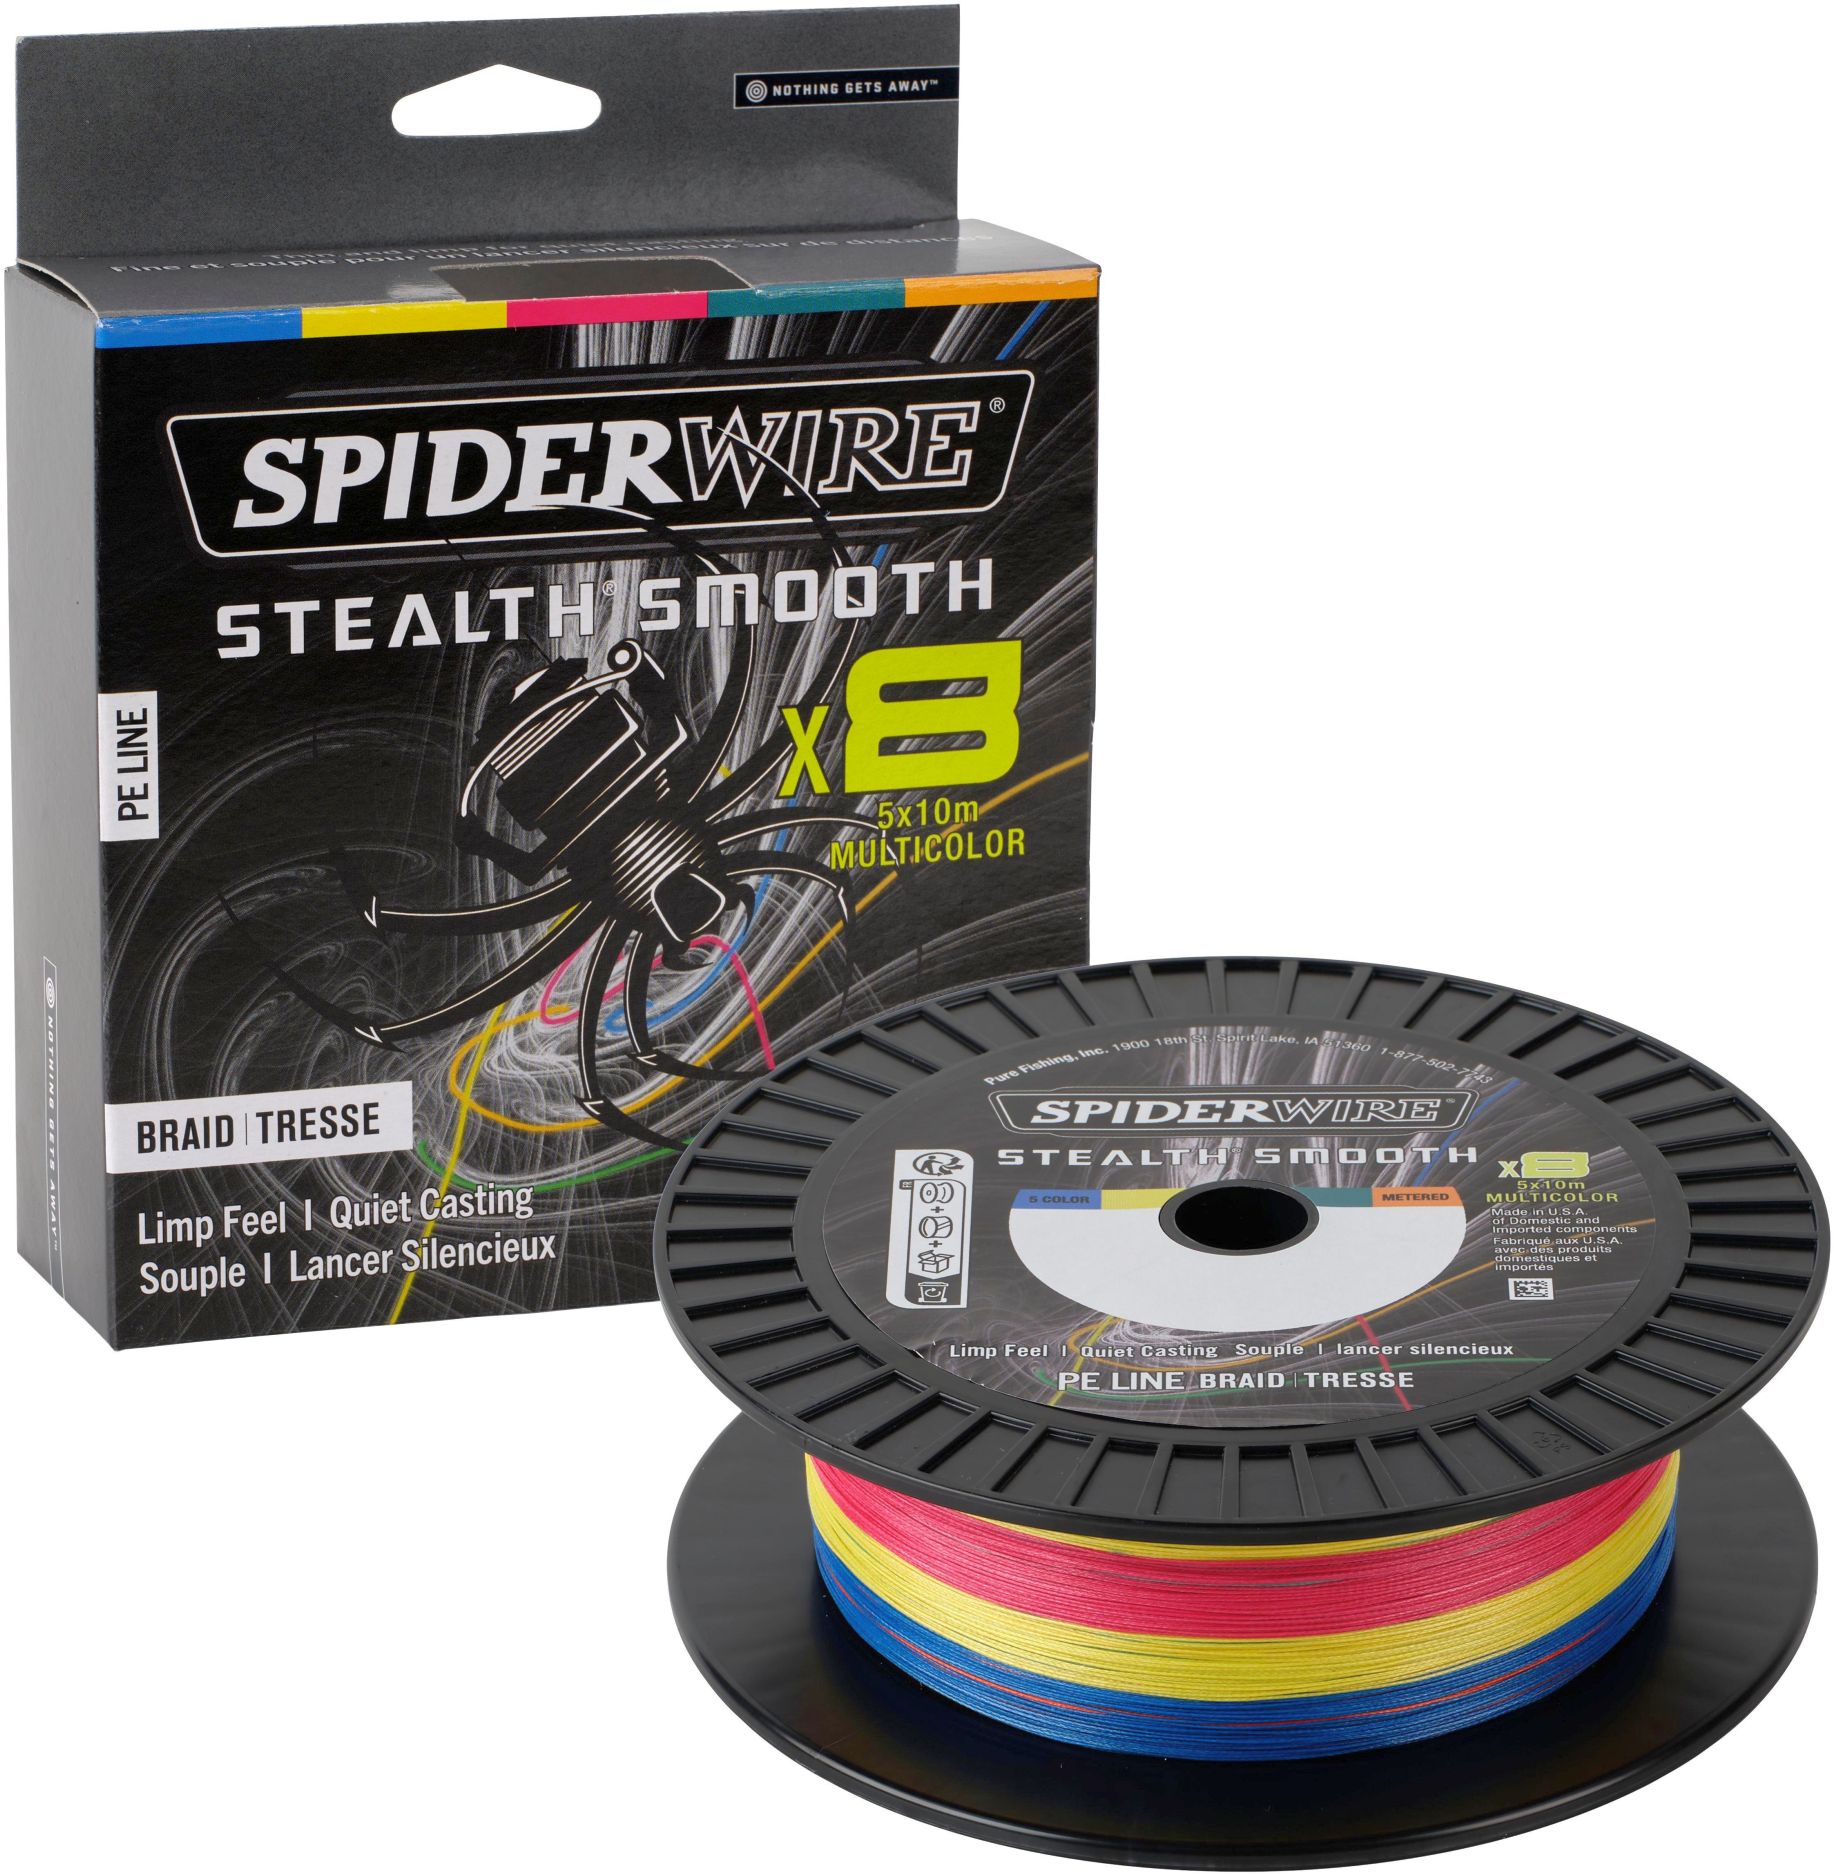 SPIDERWIRE Stealth Smooth 8 Multicolor 600 m 0,23 mm 23,6 kg